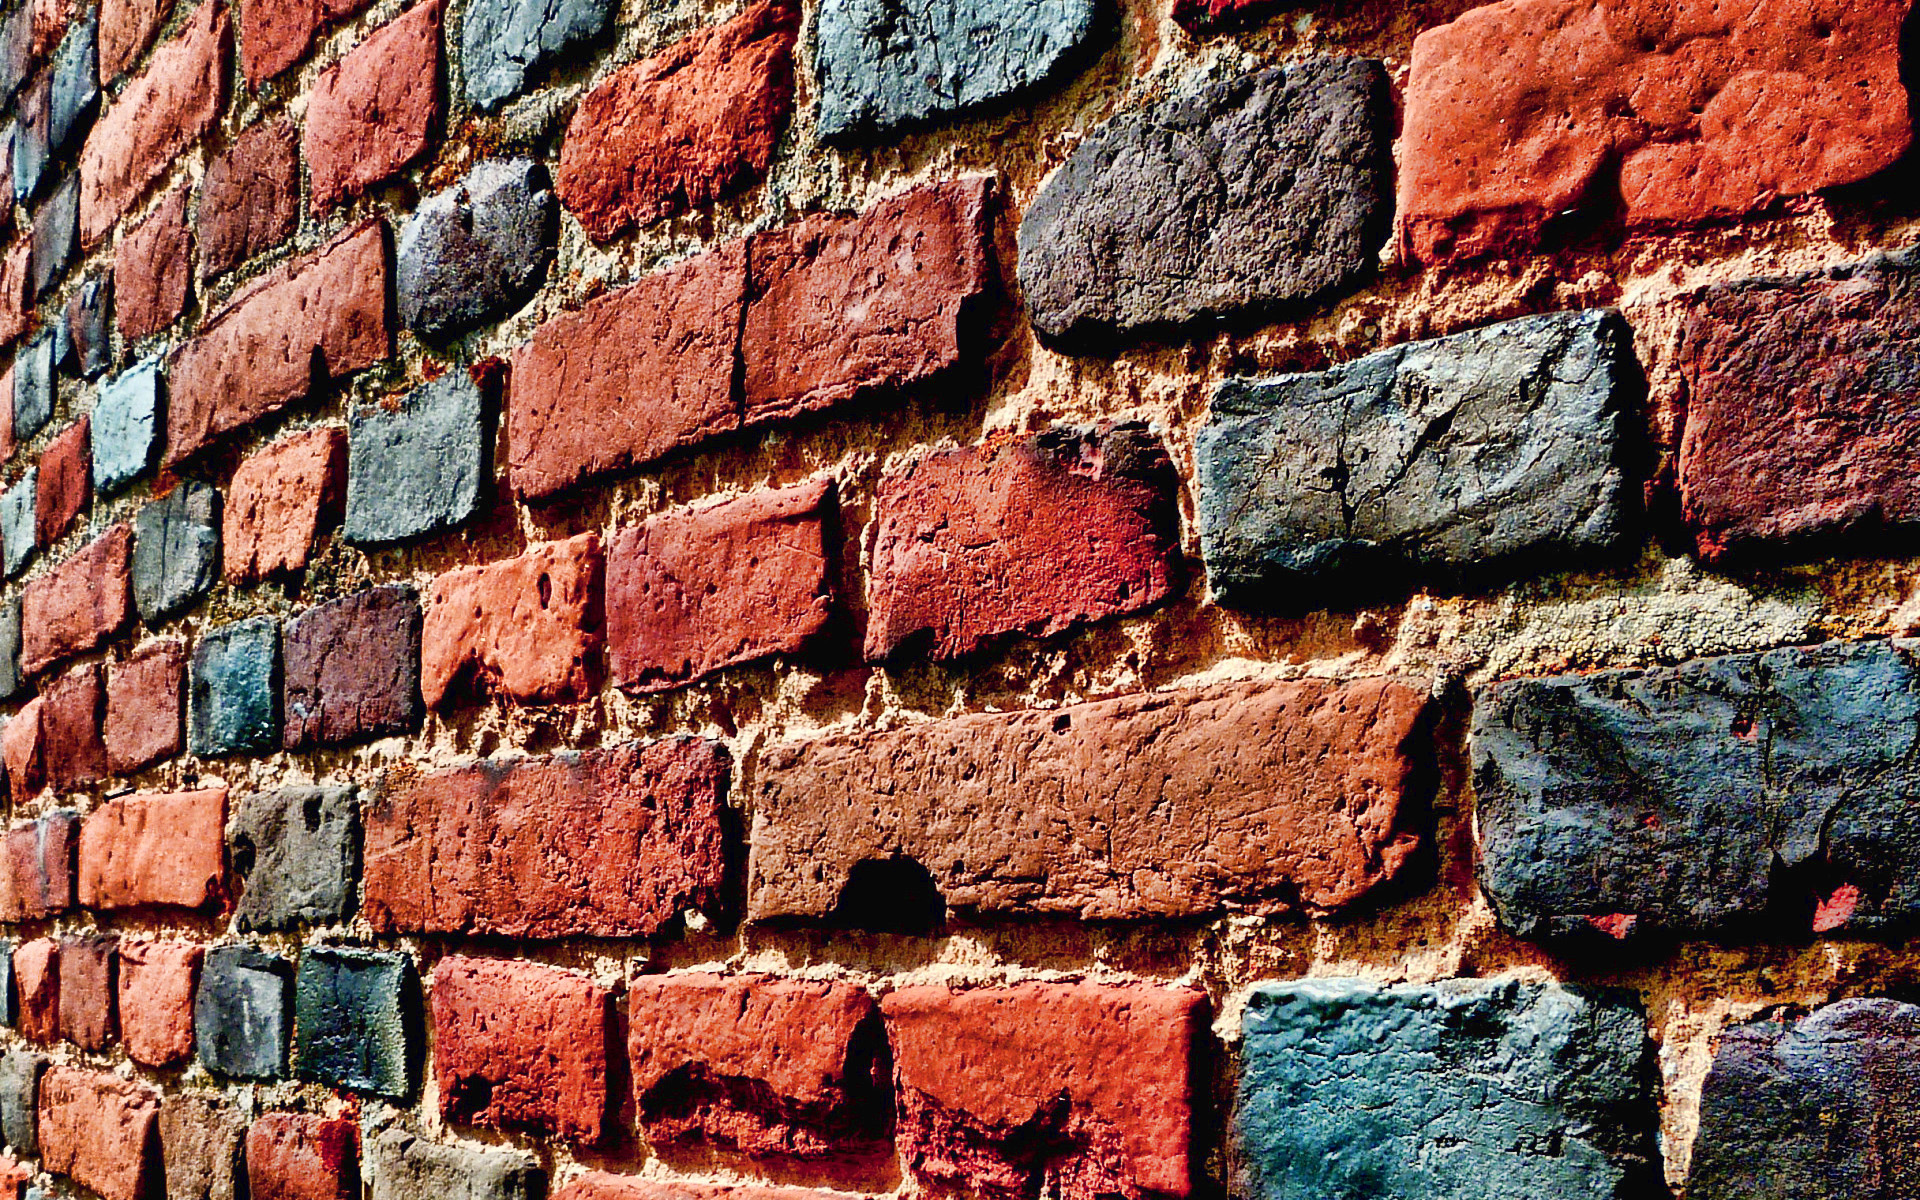 Download Wallpaper Brick Wall, Grunge, Red Brick, Close Up, Bricks Textures, Bricks, Wall For Desktop With Resolution 1920x1200. High Quality HD Picture Wallpaper